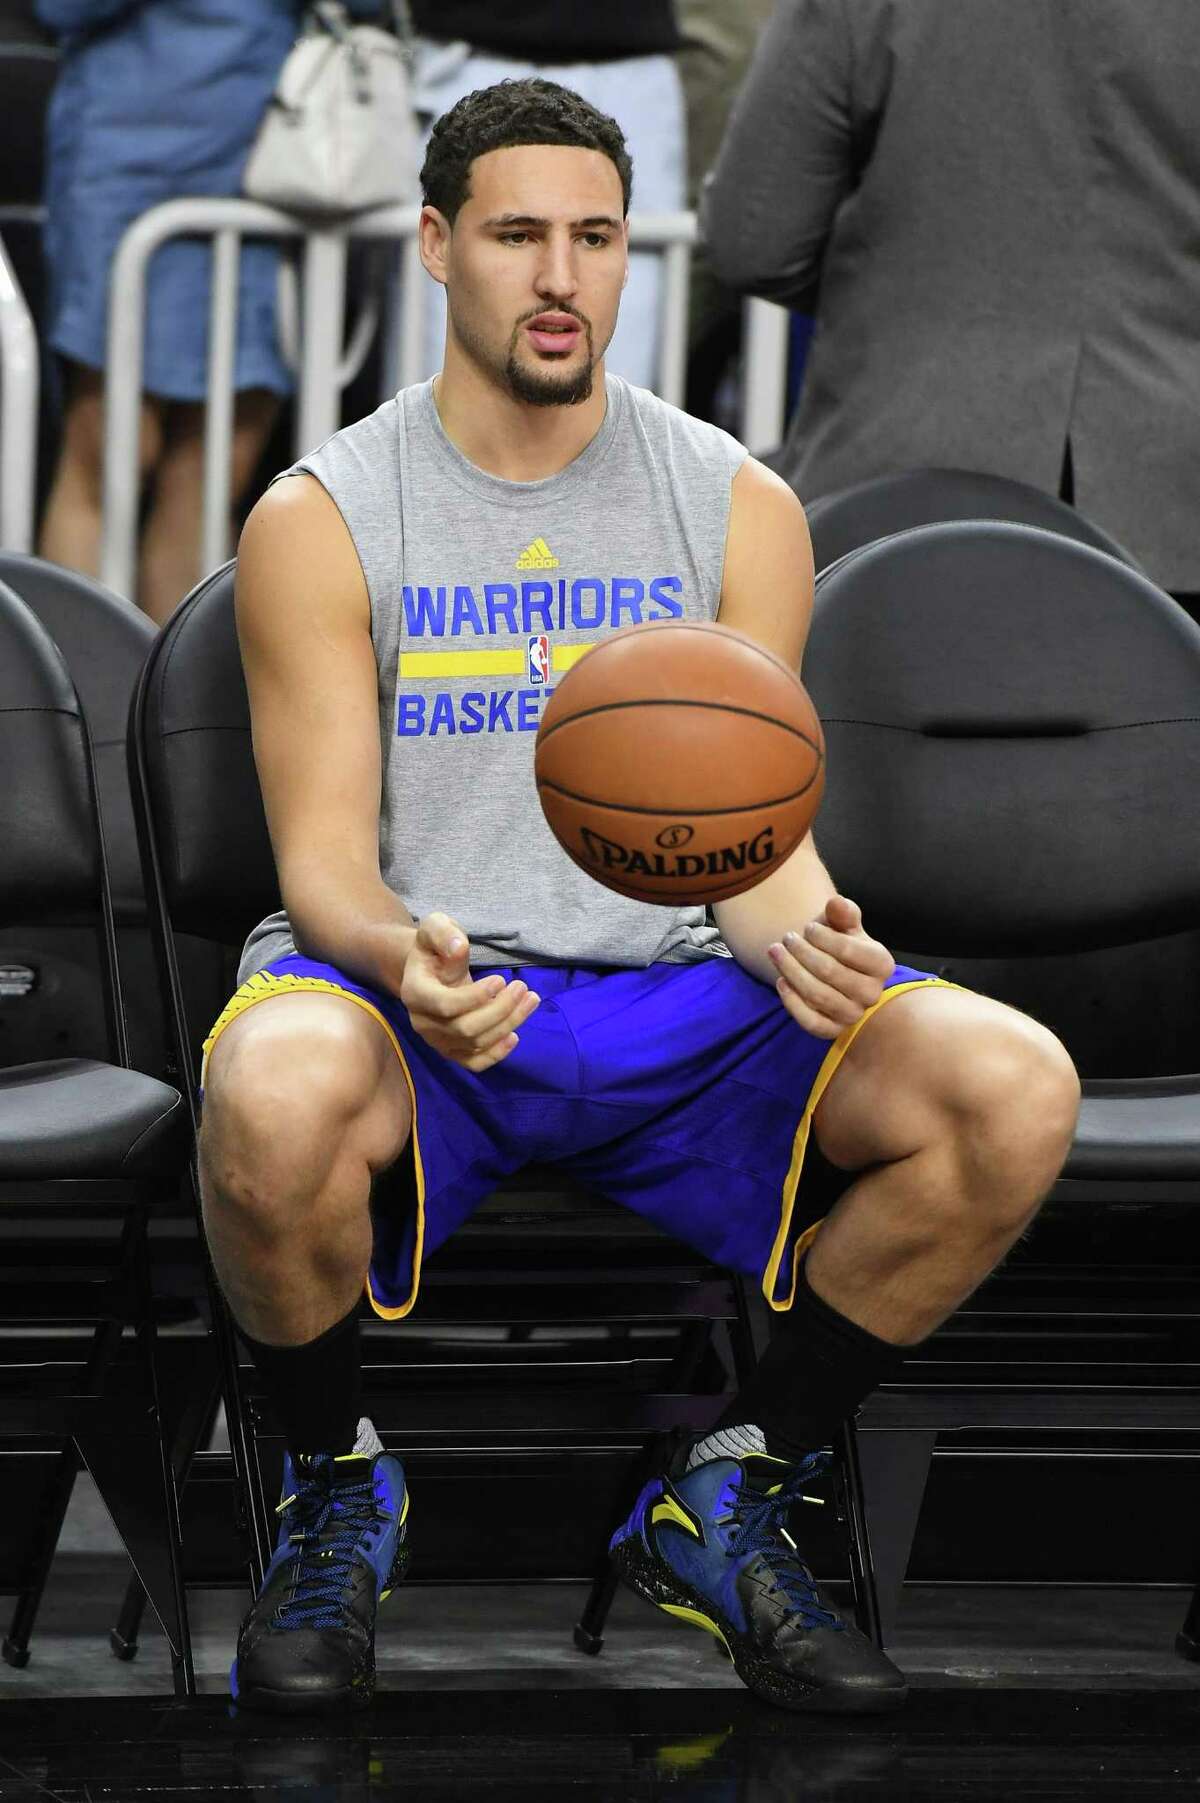 Klay Thompson #11 of the Golden State Warriors sits on the bench during warmups before a preseason game against the Los Angeles Lakers at T-Mobile Arena on October 15, 2016 in Las Vegas, Nevada.